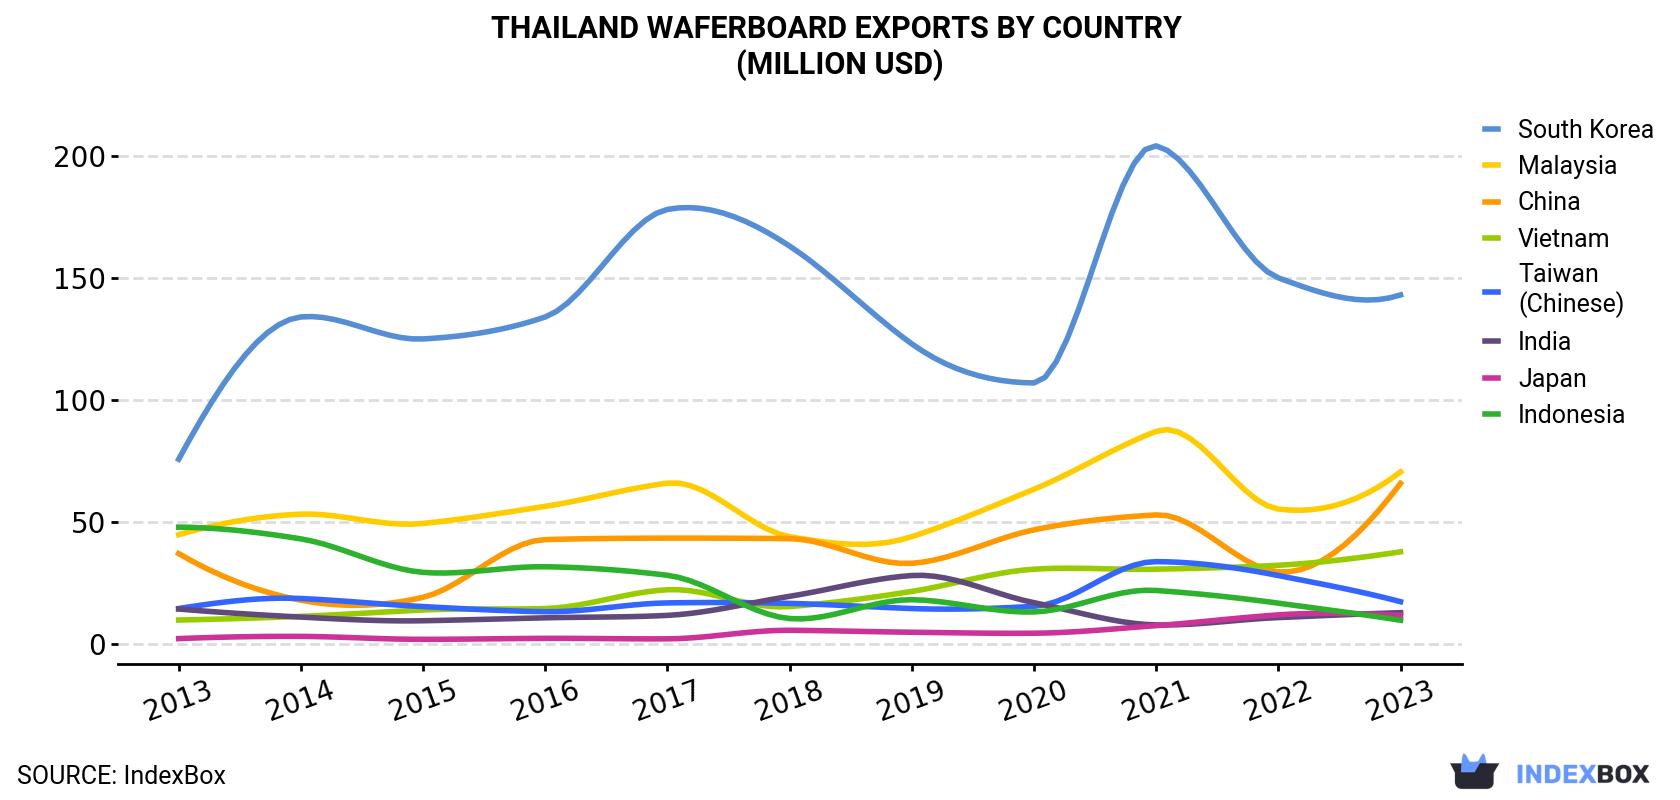 Thailand Waferboard Exports By Country (Million USD)